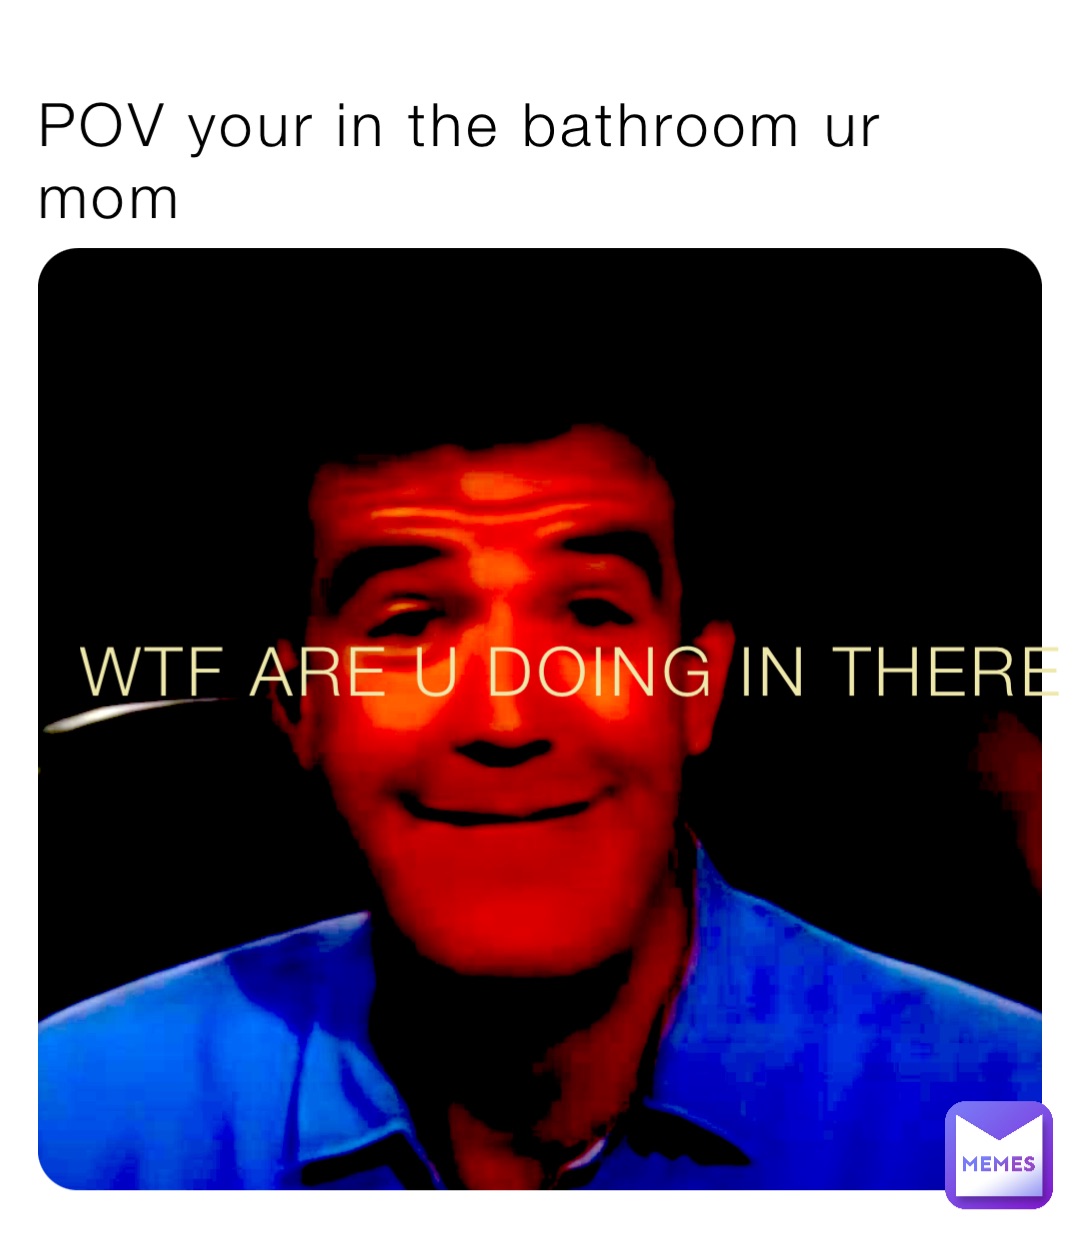 POV your in the bathroom ur mom WTF ARE U DOING IN THERE